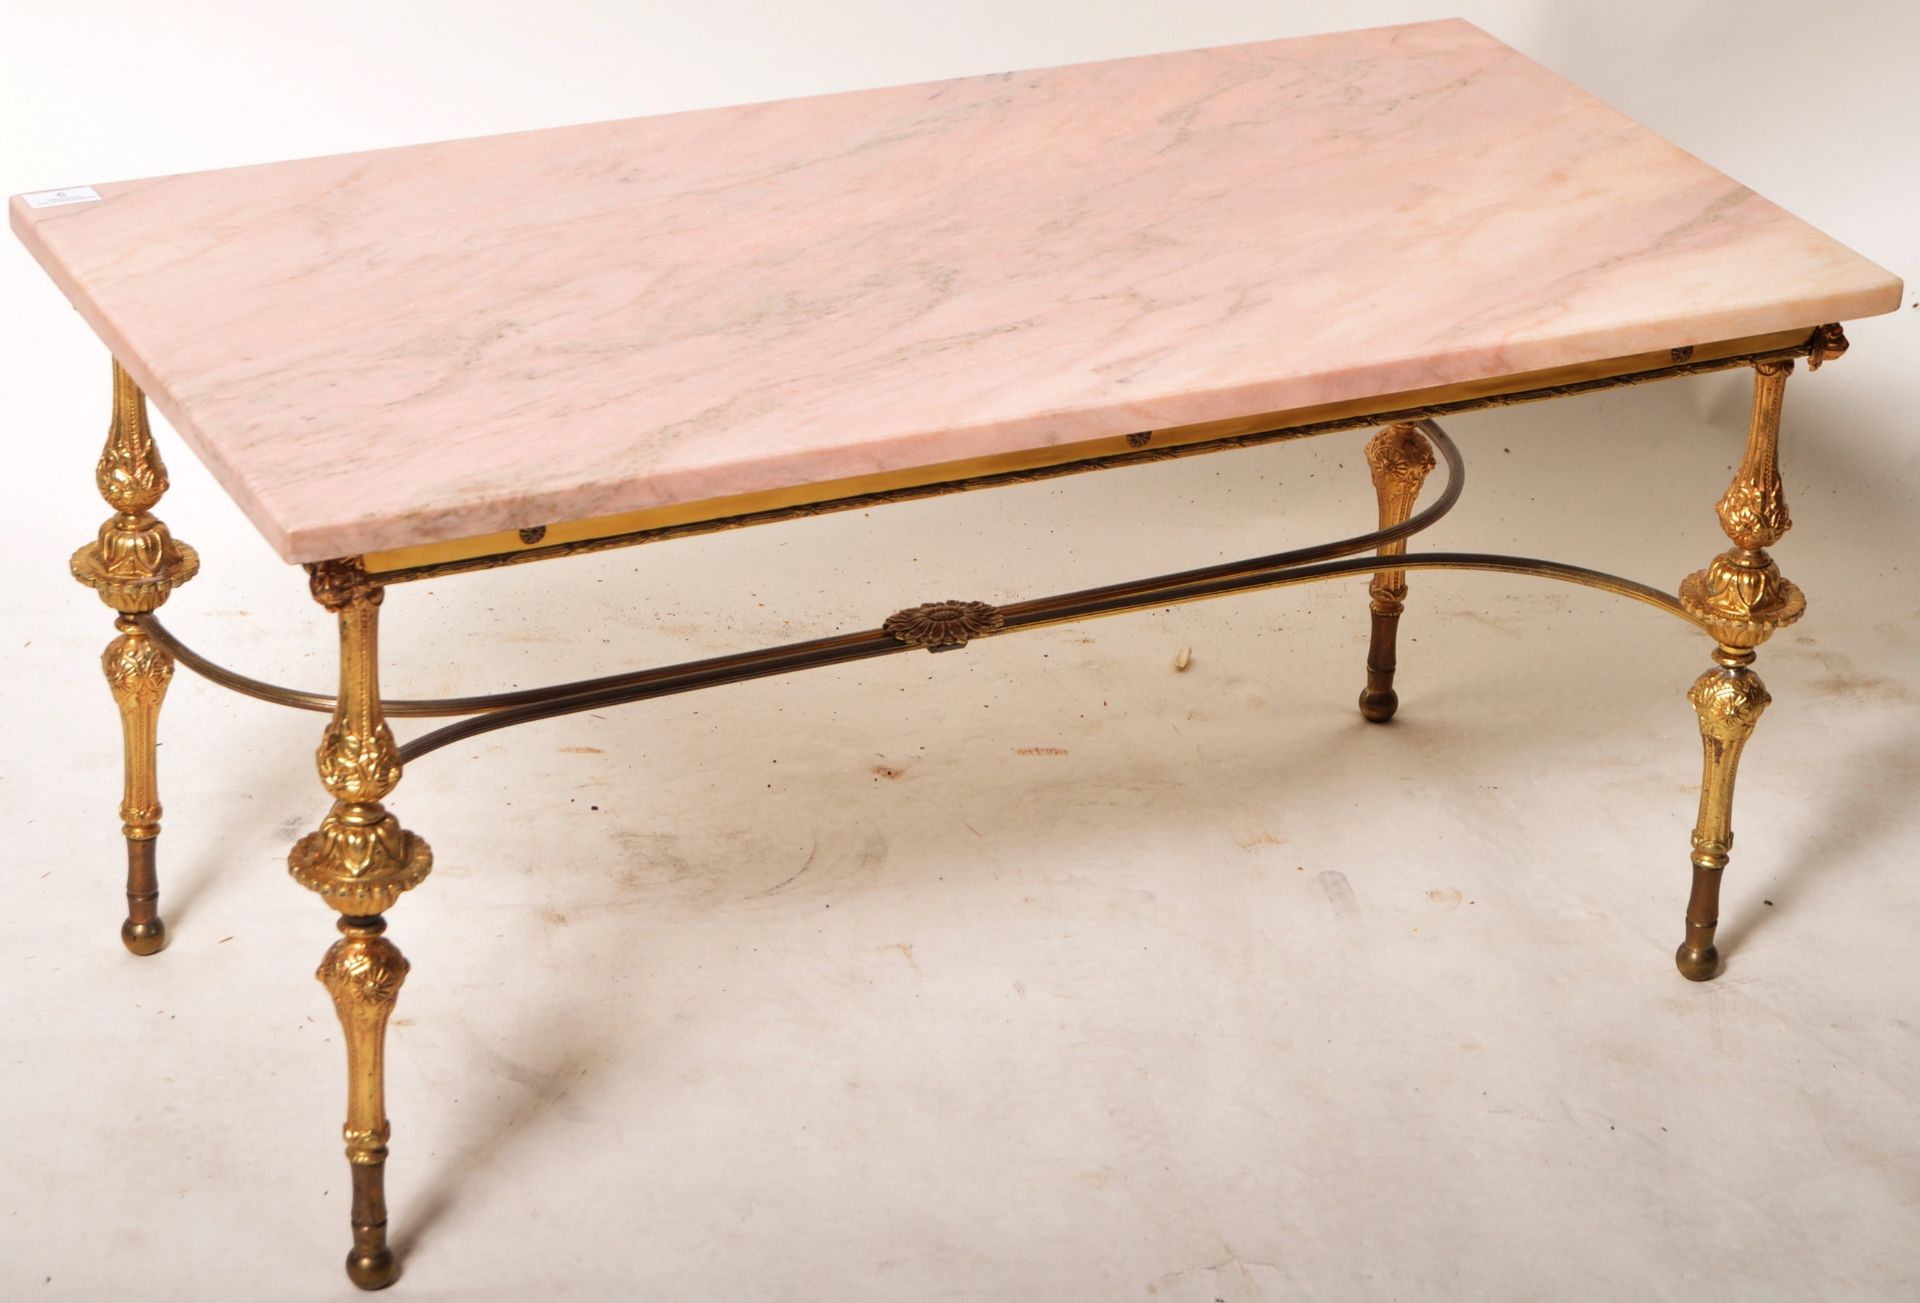 MID 20TH CENTURY HOLLYWOOD REGENCY PINK MARBLE AND BRASS COFFEE TABLE - Image 2 of 5